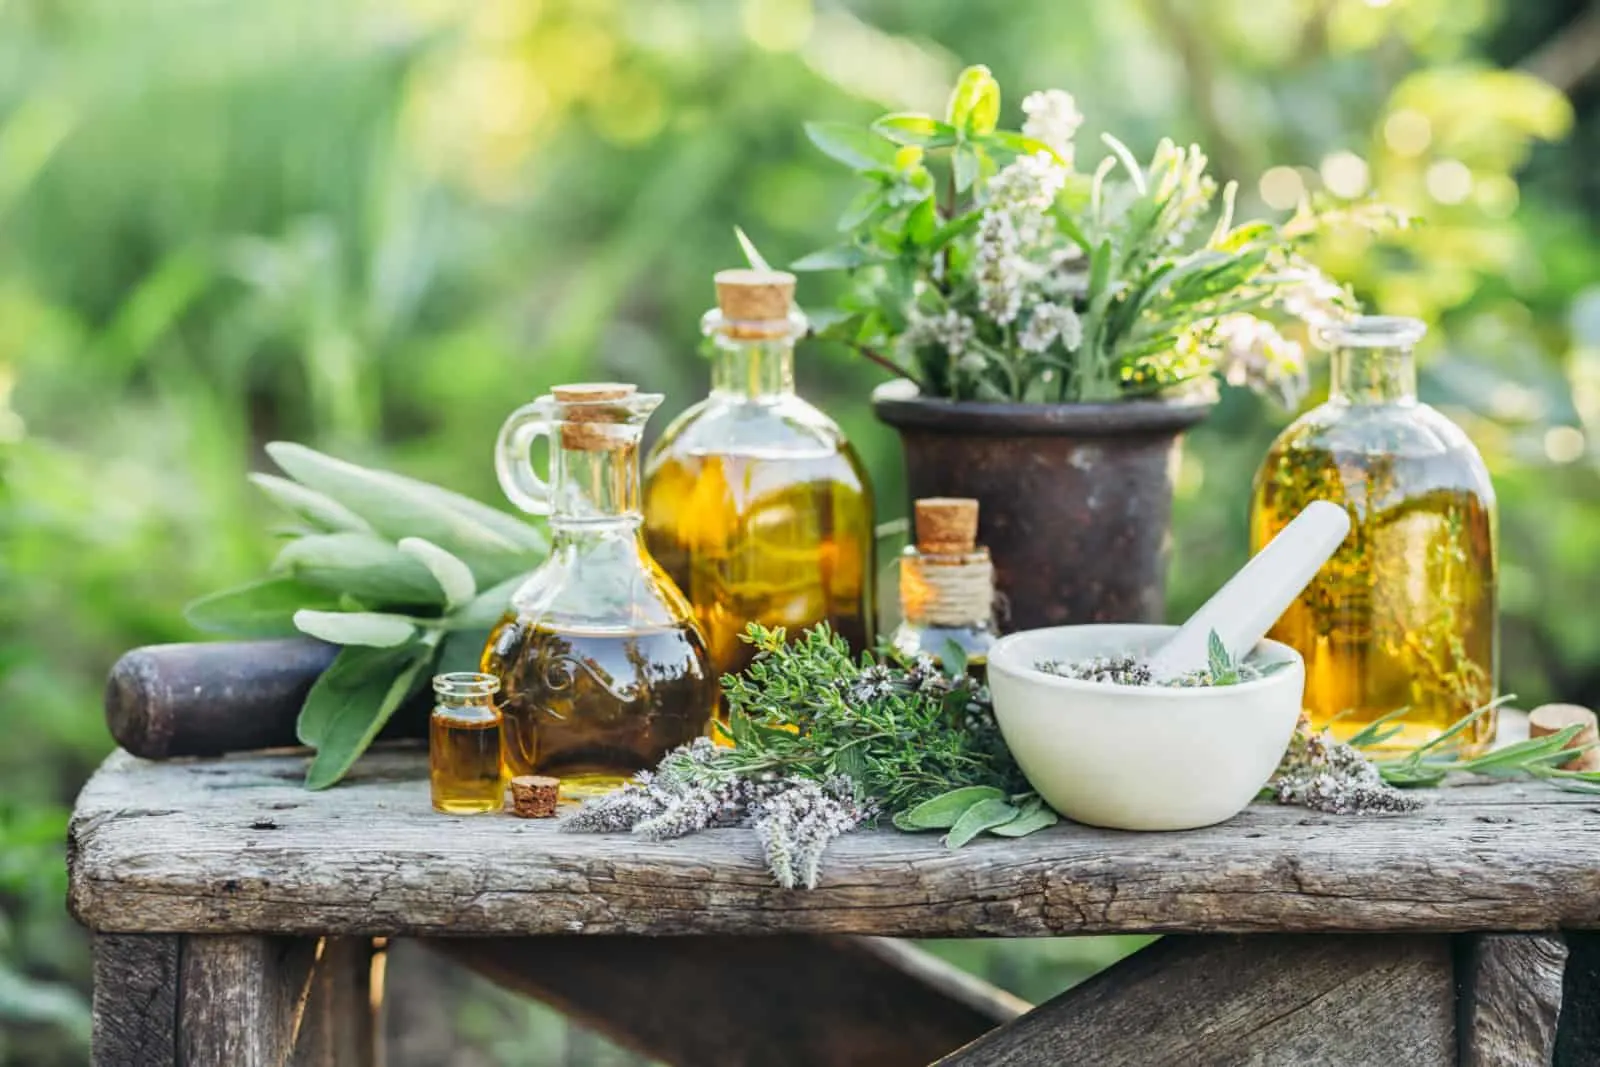 Fresh herbs from the garden and the different types of oils